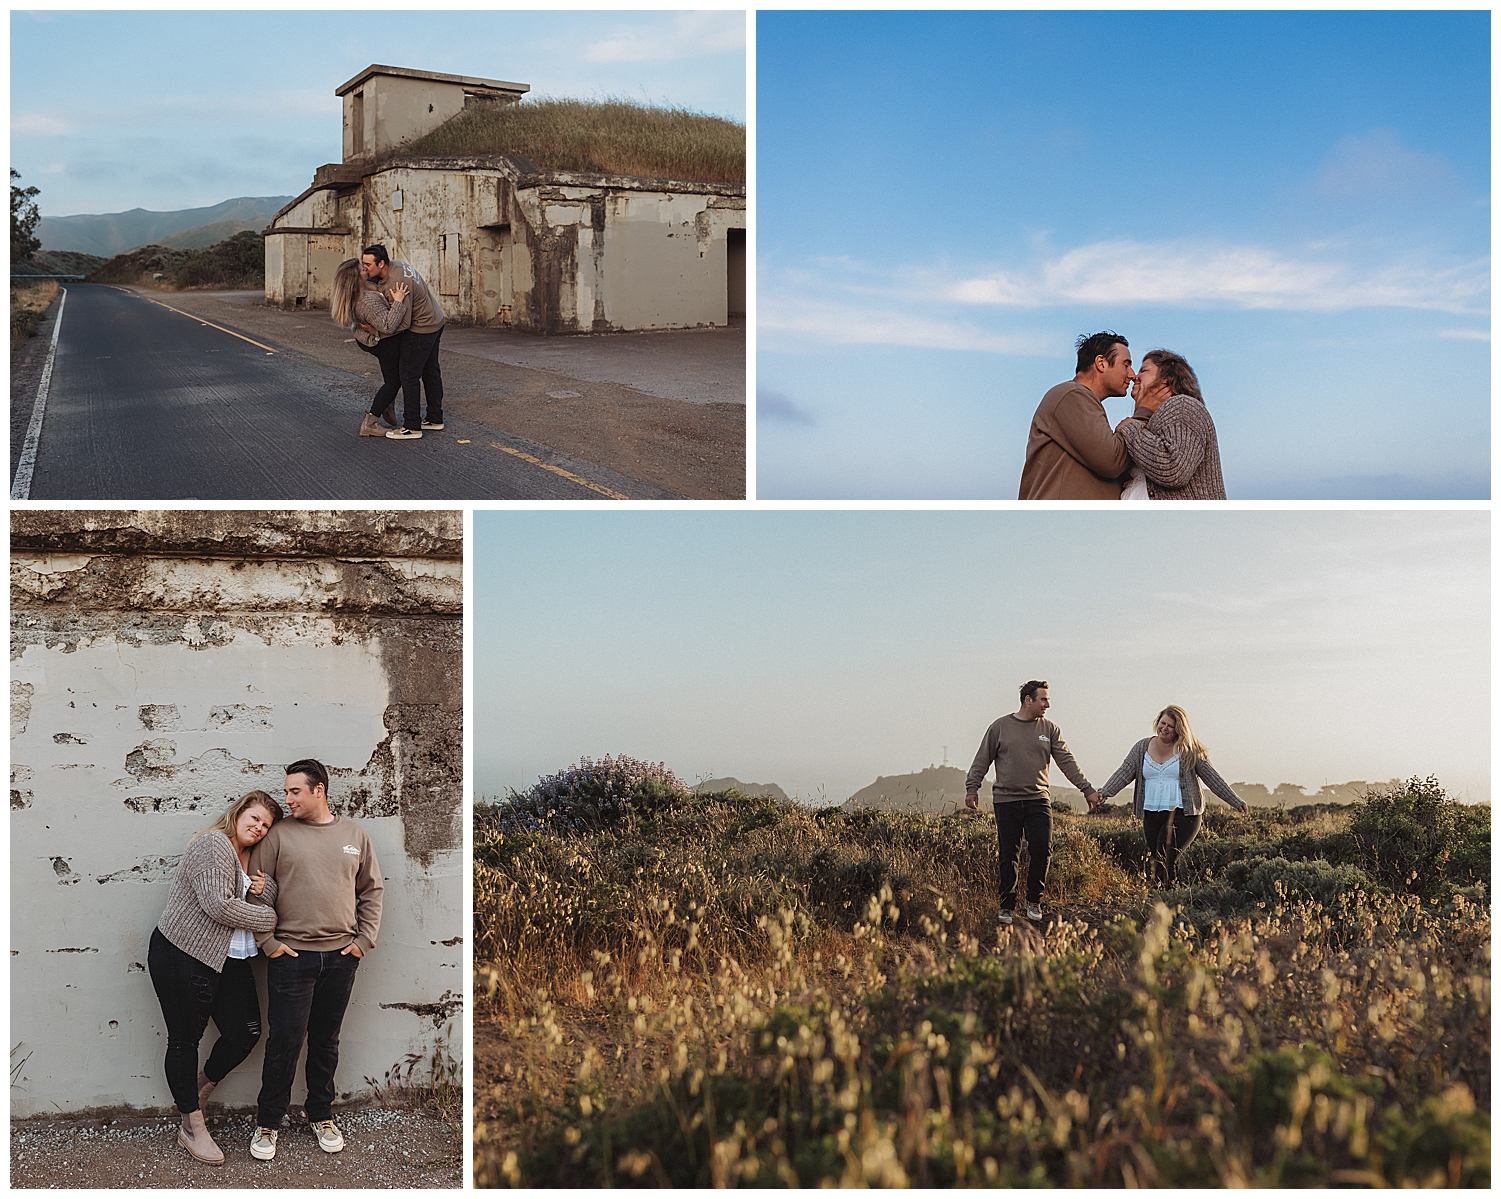 Fun and playful couples photos at Battery Rathbone McIndoe in the Marin Headlands.